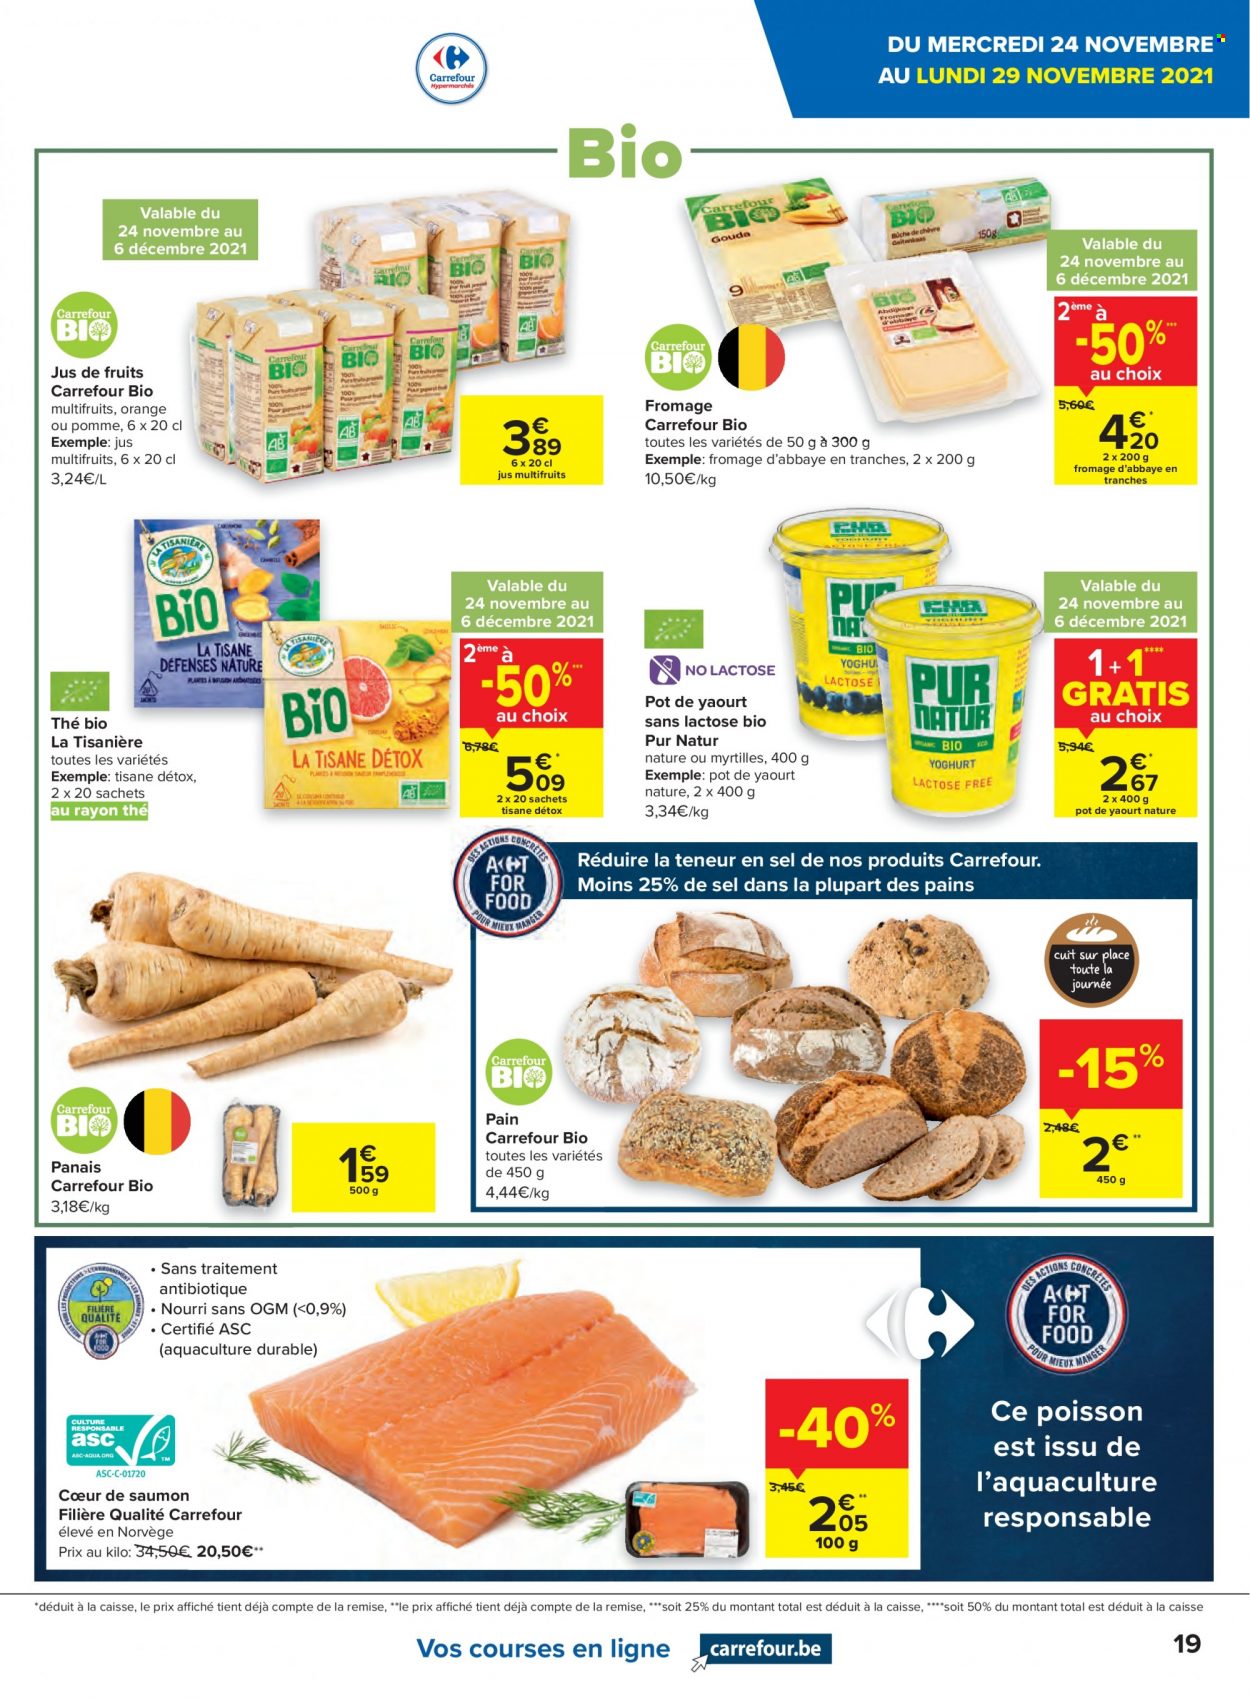 Catalogue Carrefour hypermarkt - 24.11.2021 - 6.12.2021. Page 19.